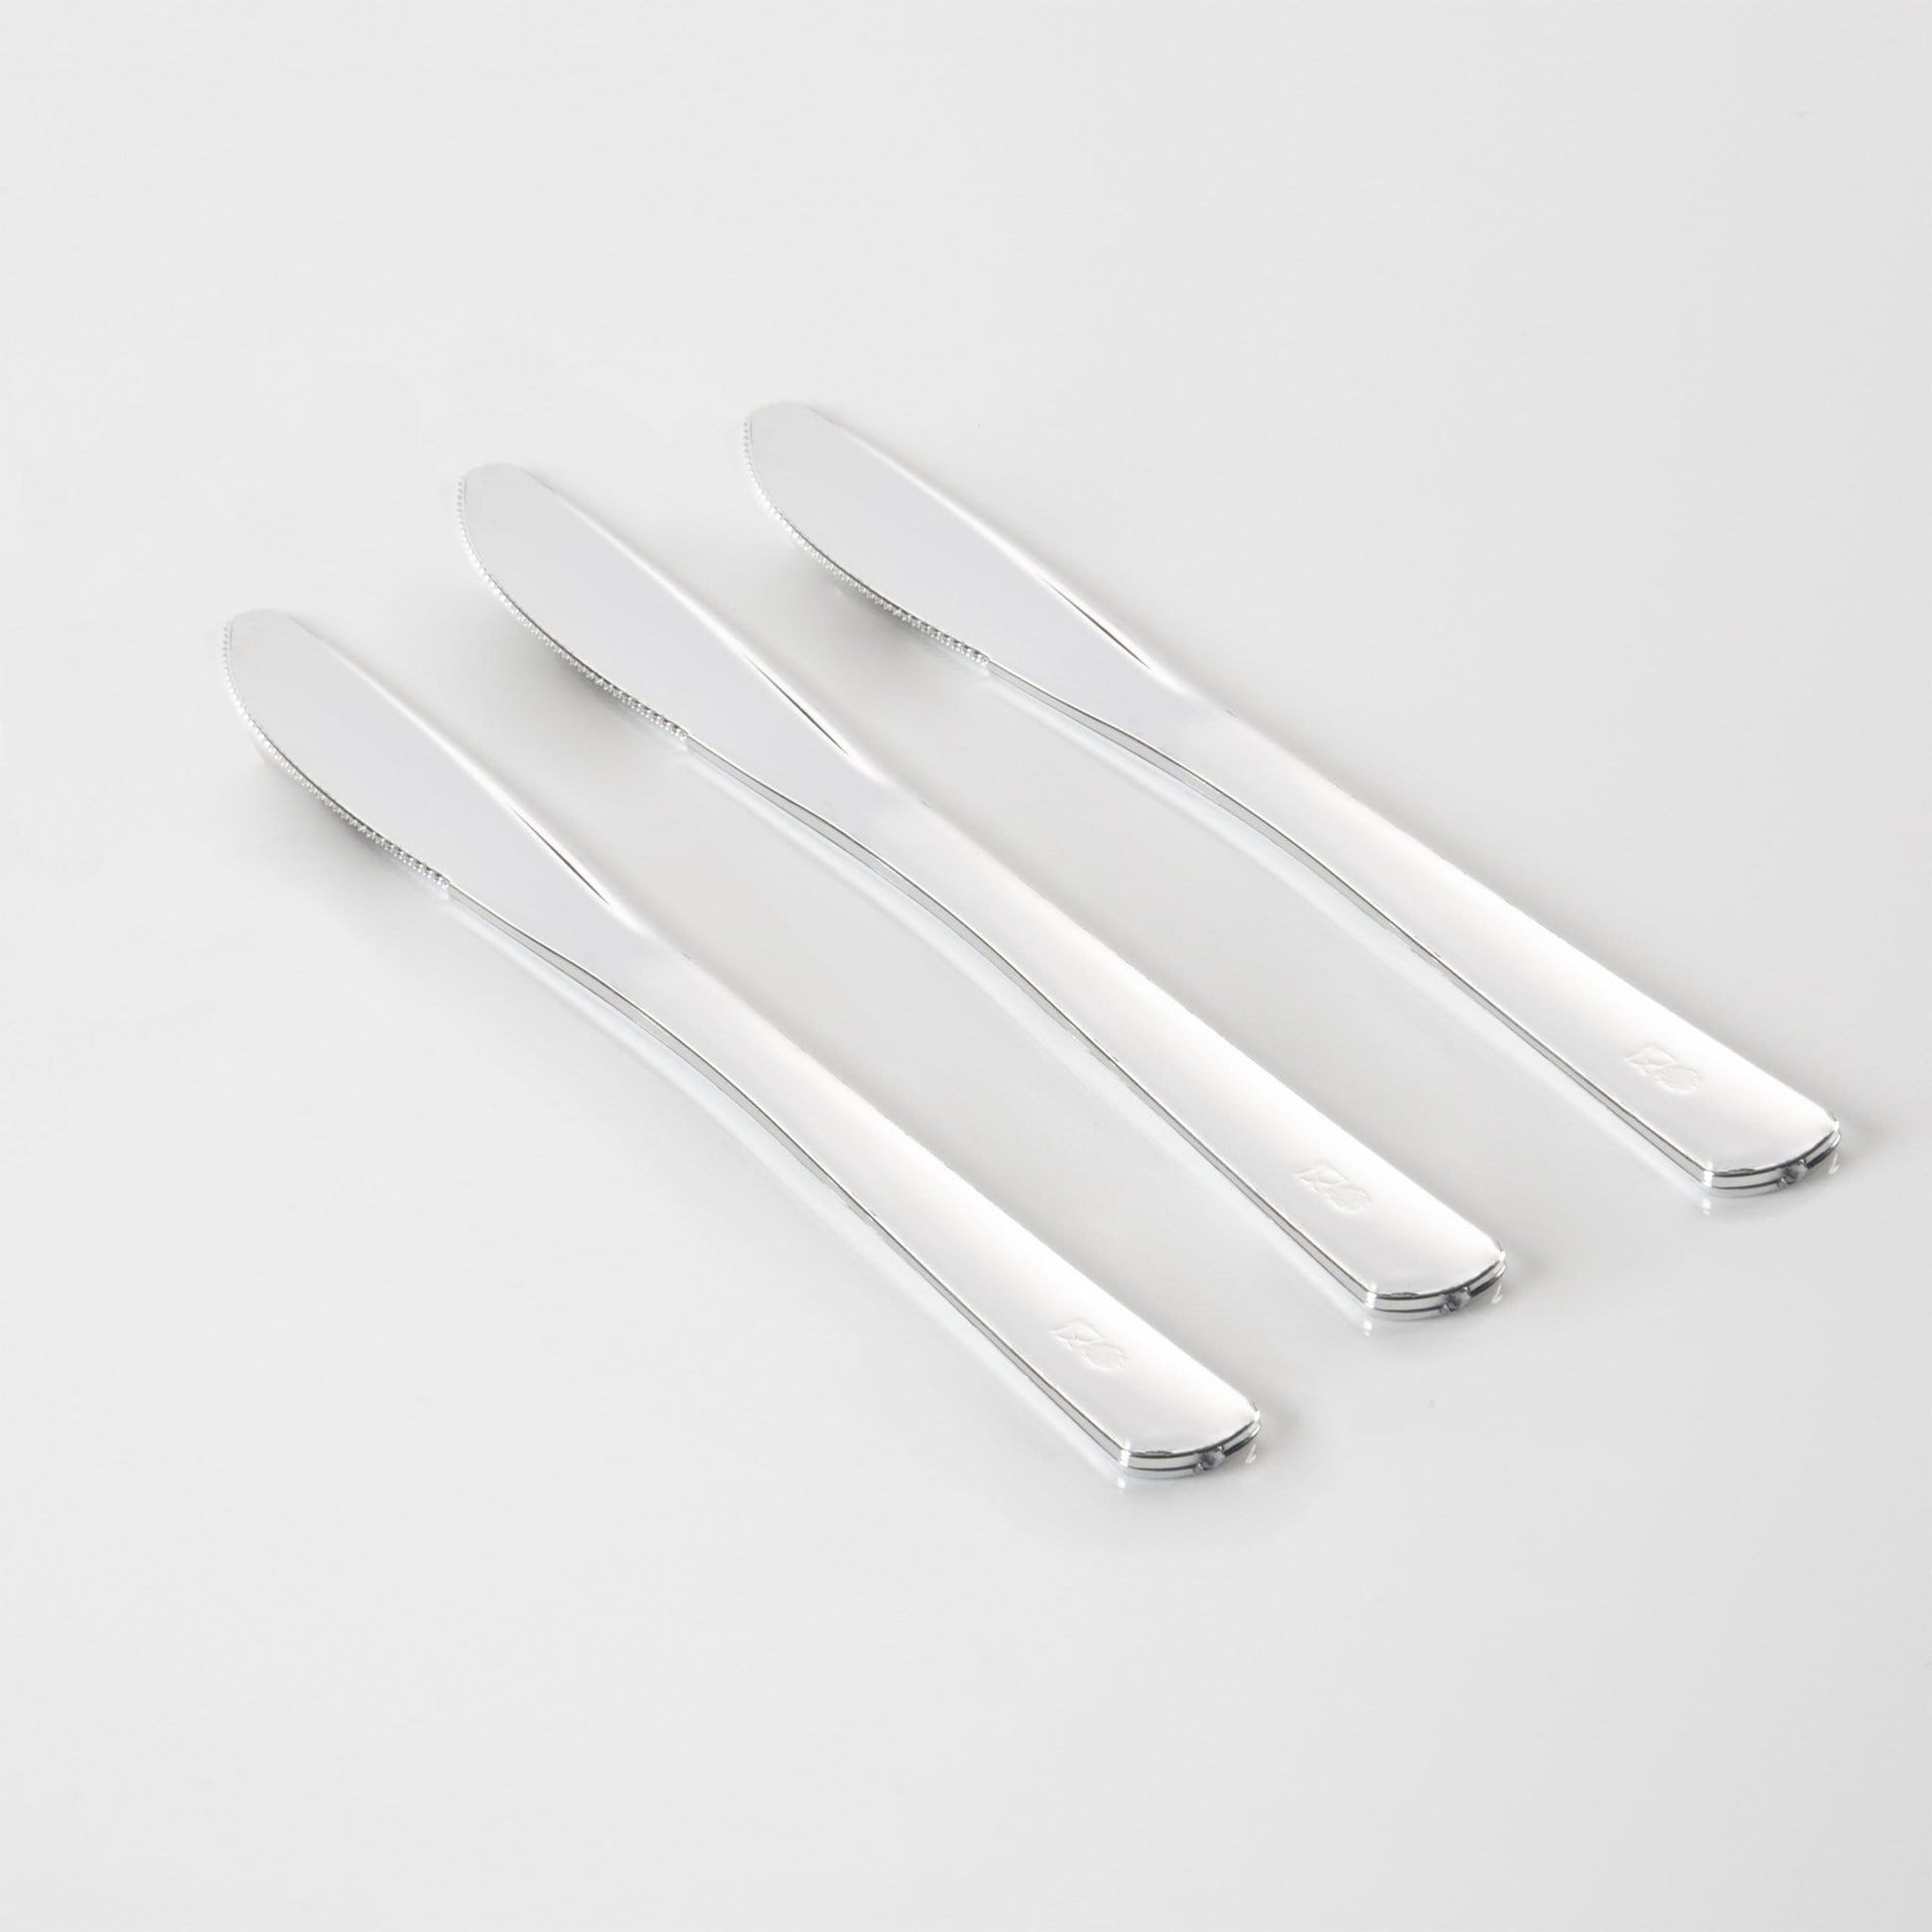 Classic Design Silver Plastic Knives | 20 Knives - SimplySoiree